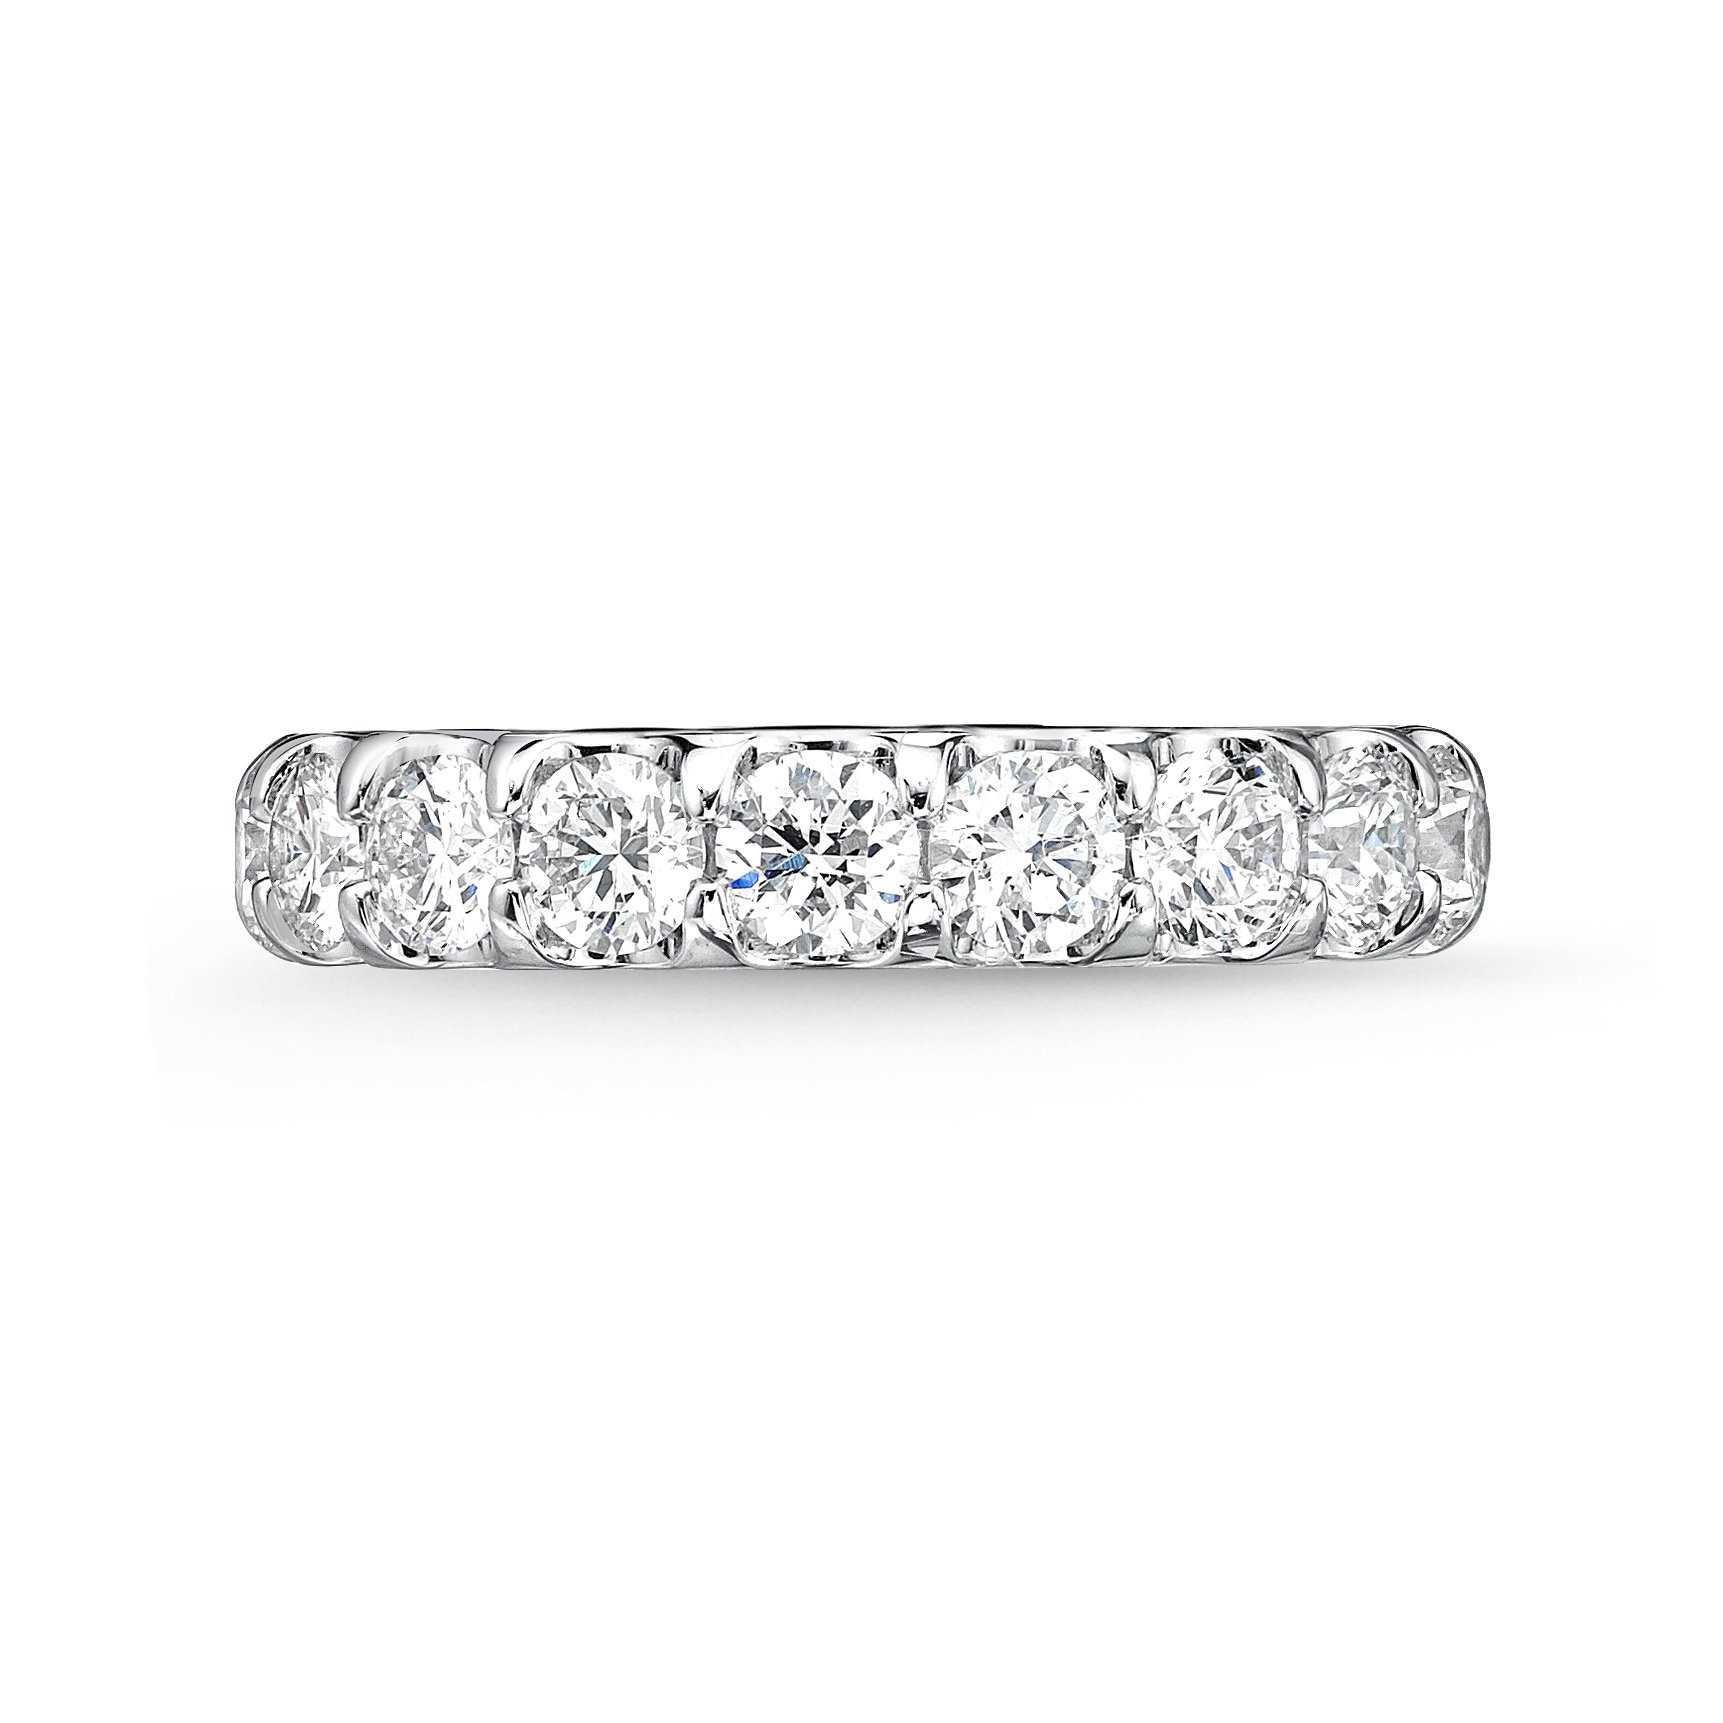 The Memoire Platinum Diamond Odessa Band is crafted with Platinum metal and is set with 9 Brilliant Round Diamonds accounting for 1.53ctw of F-G Color VS Clarity. Additionally, this piece is offered in Rose Gold, White Gold, and Yellow Gold and is a